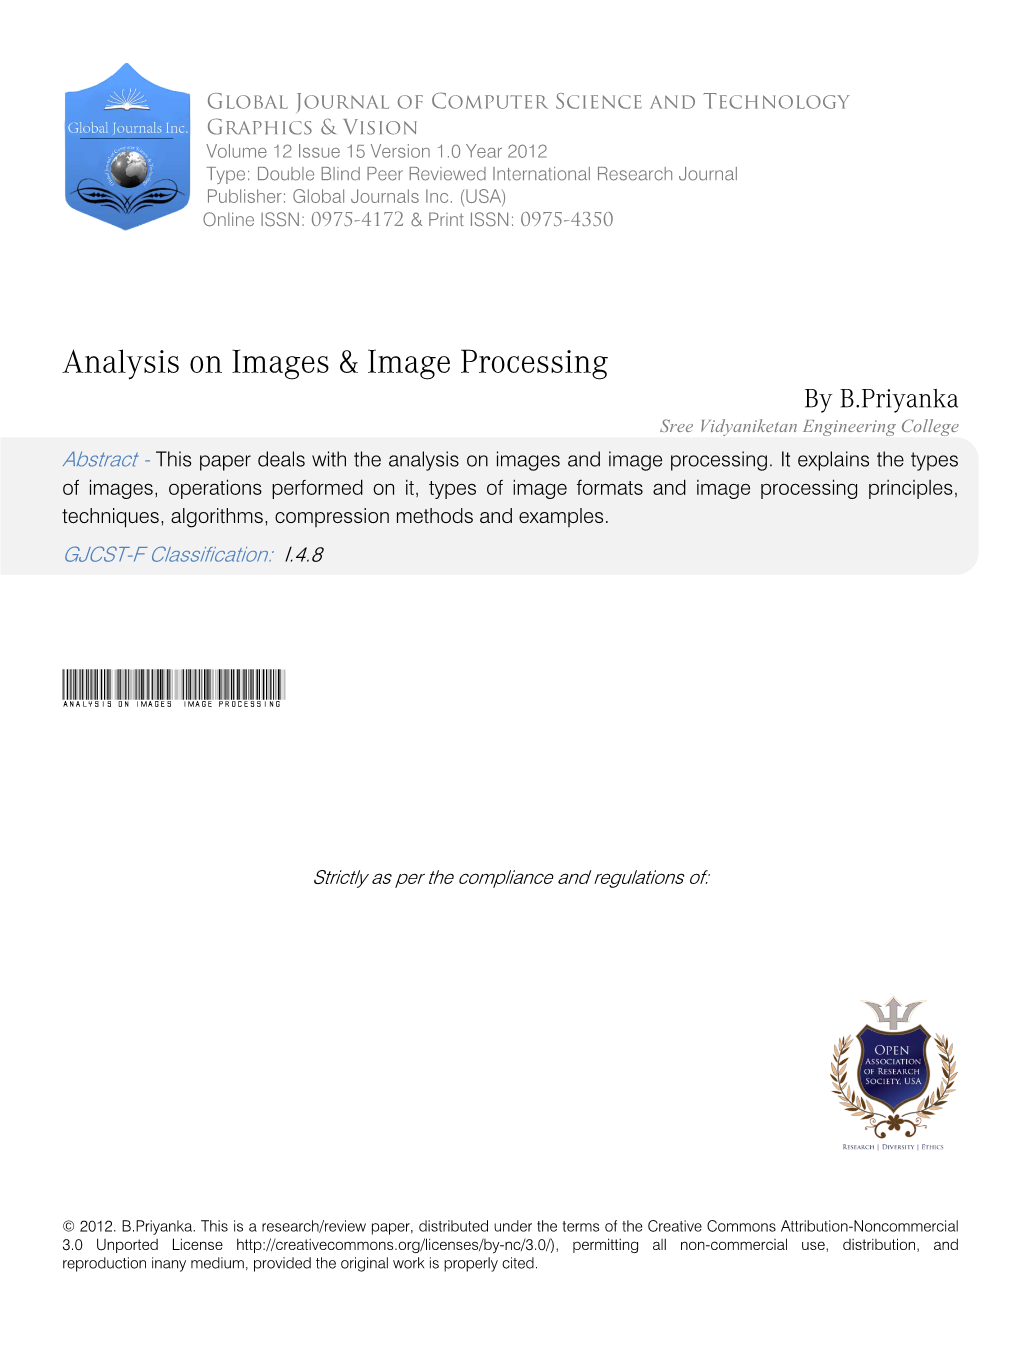 Analysis on Images & Image Processing